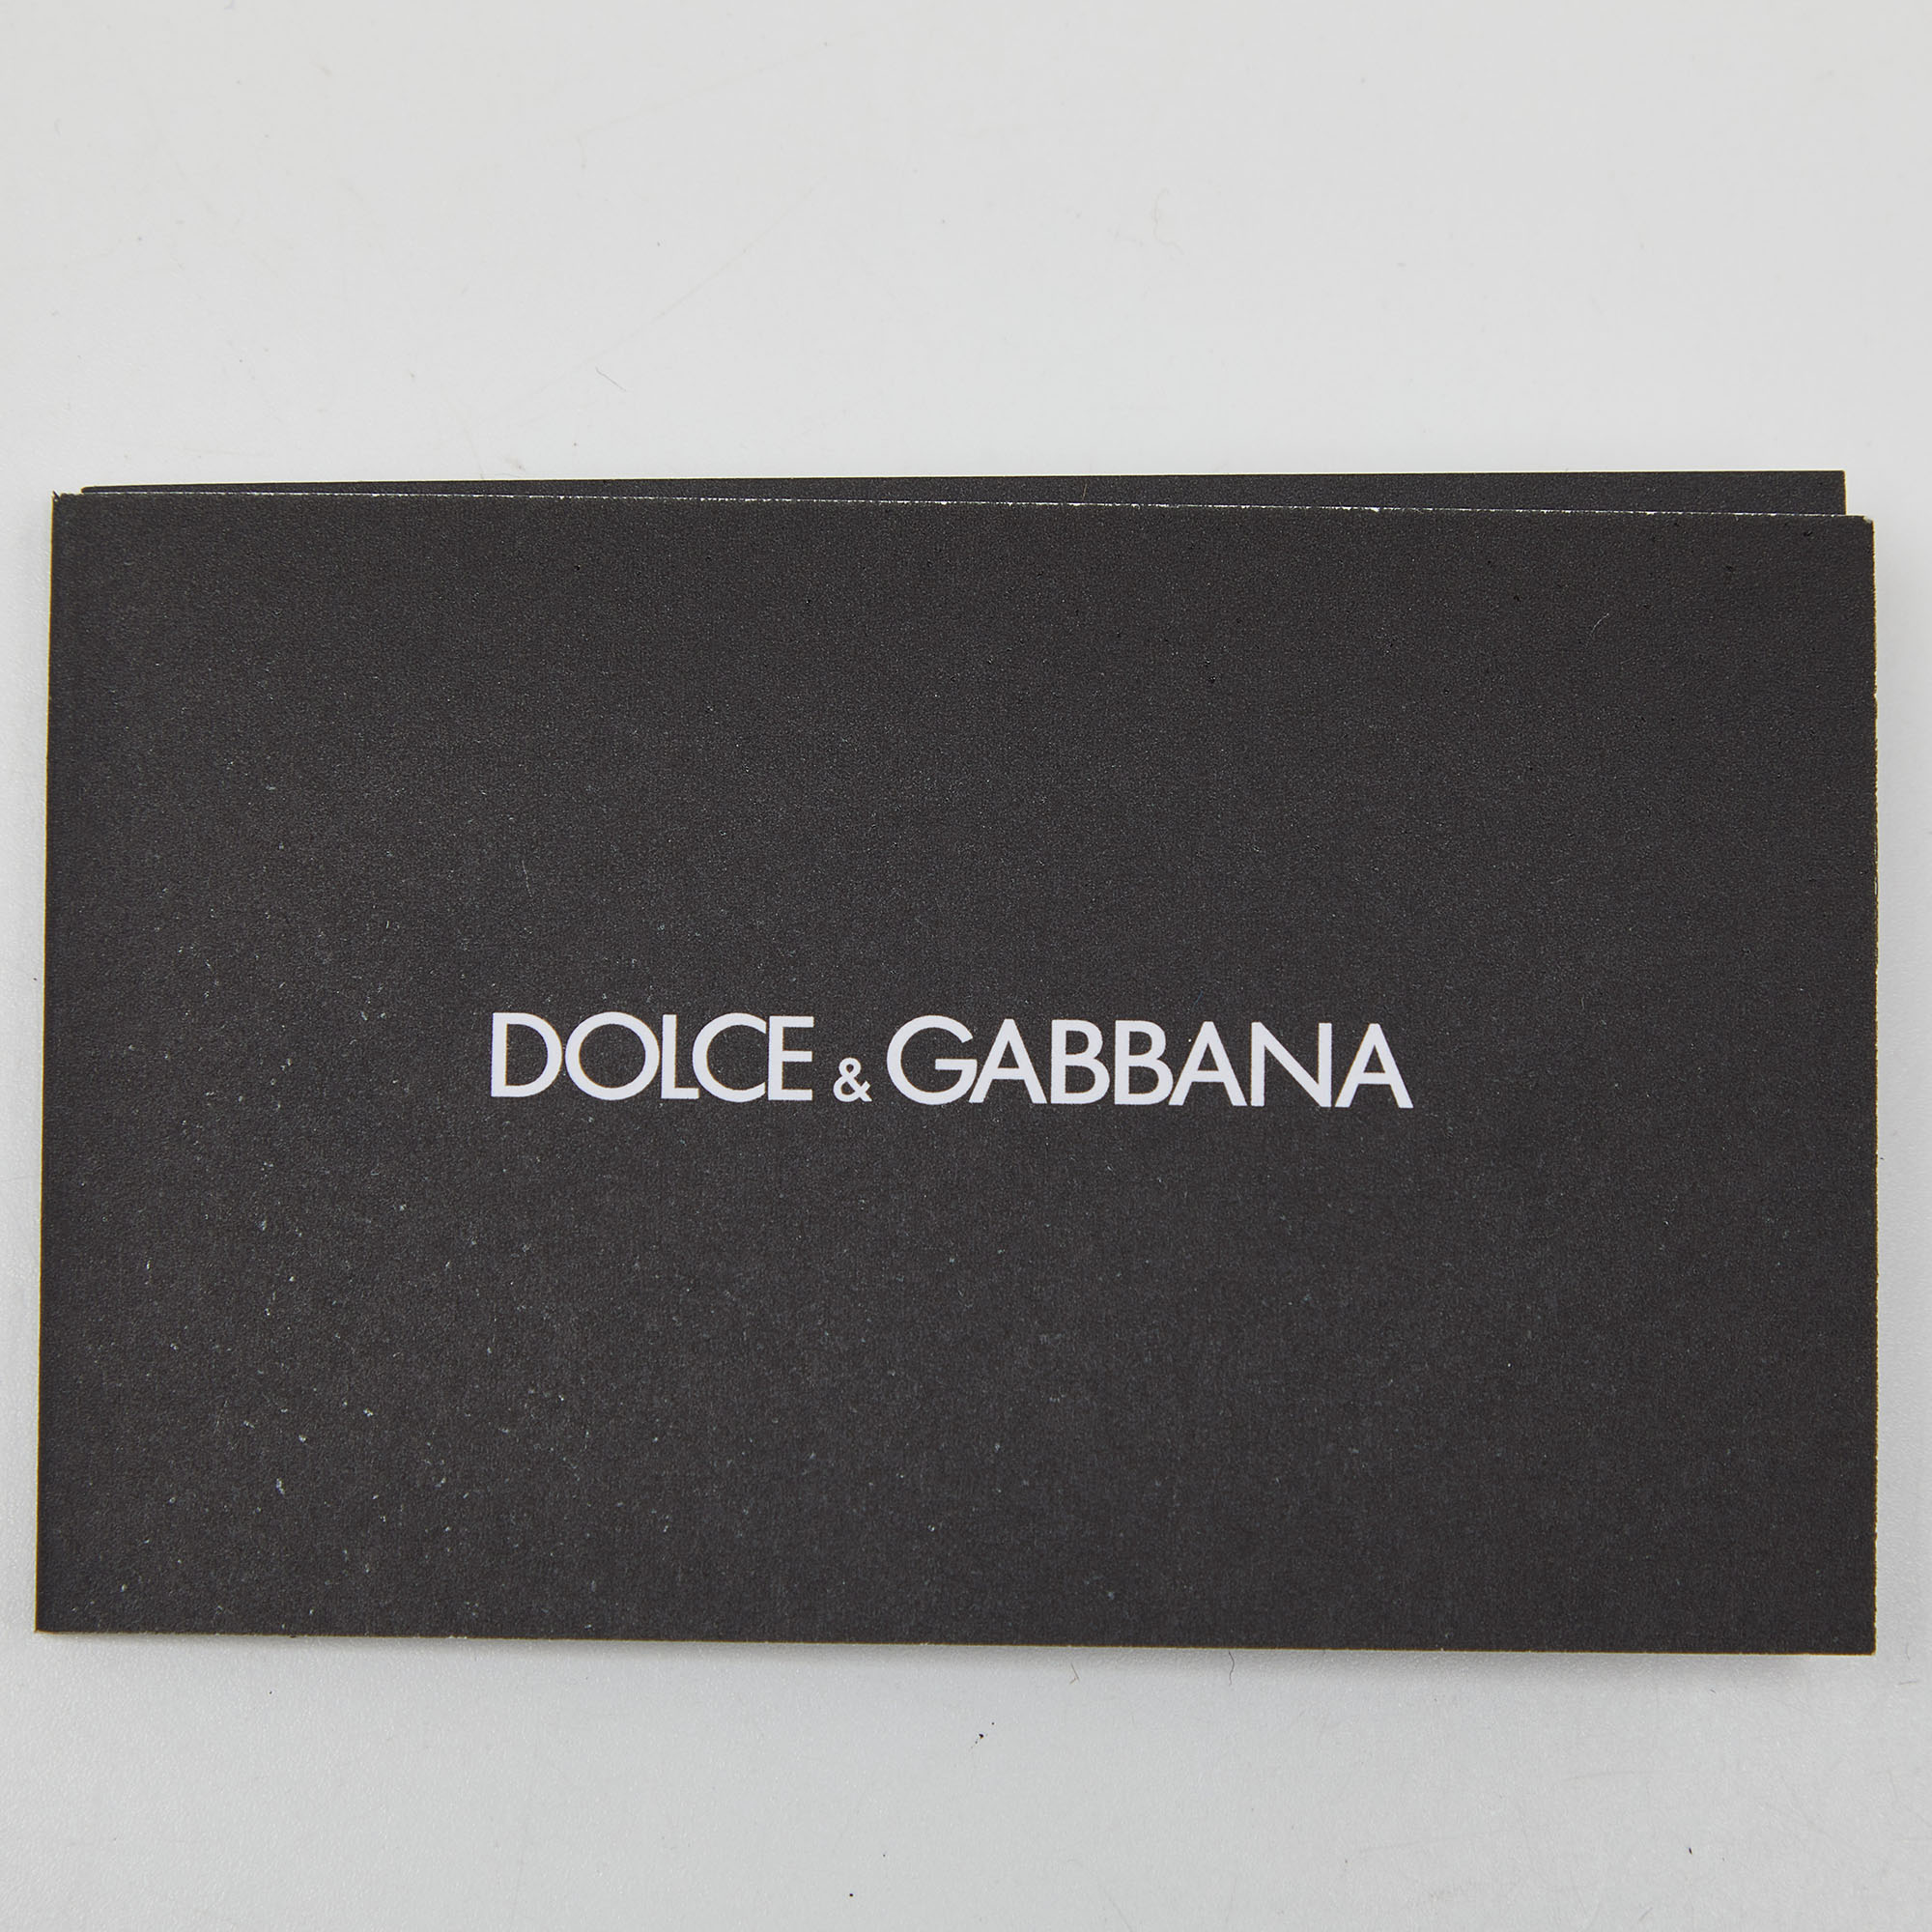 Dolce & Gabbana Multicolor Floral Print Leather IPhone 6 Case